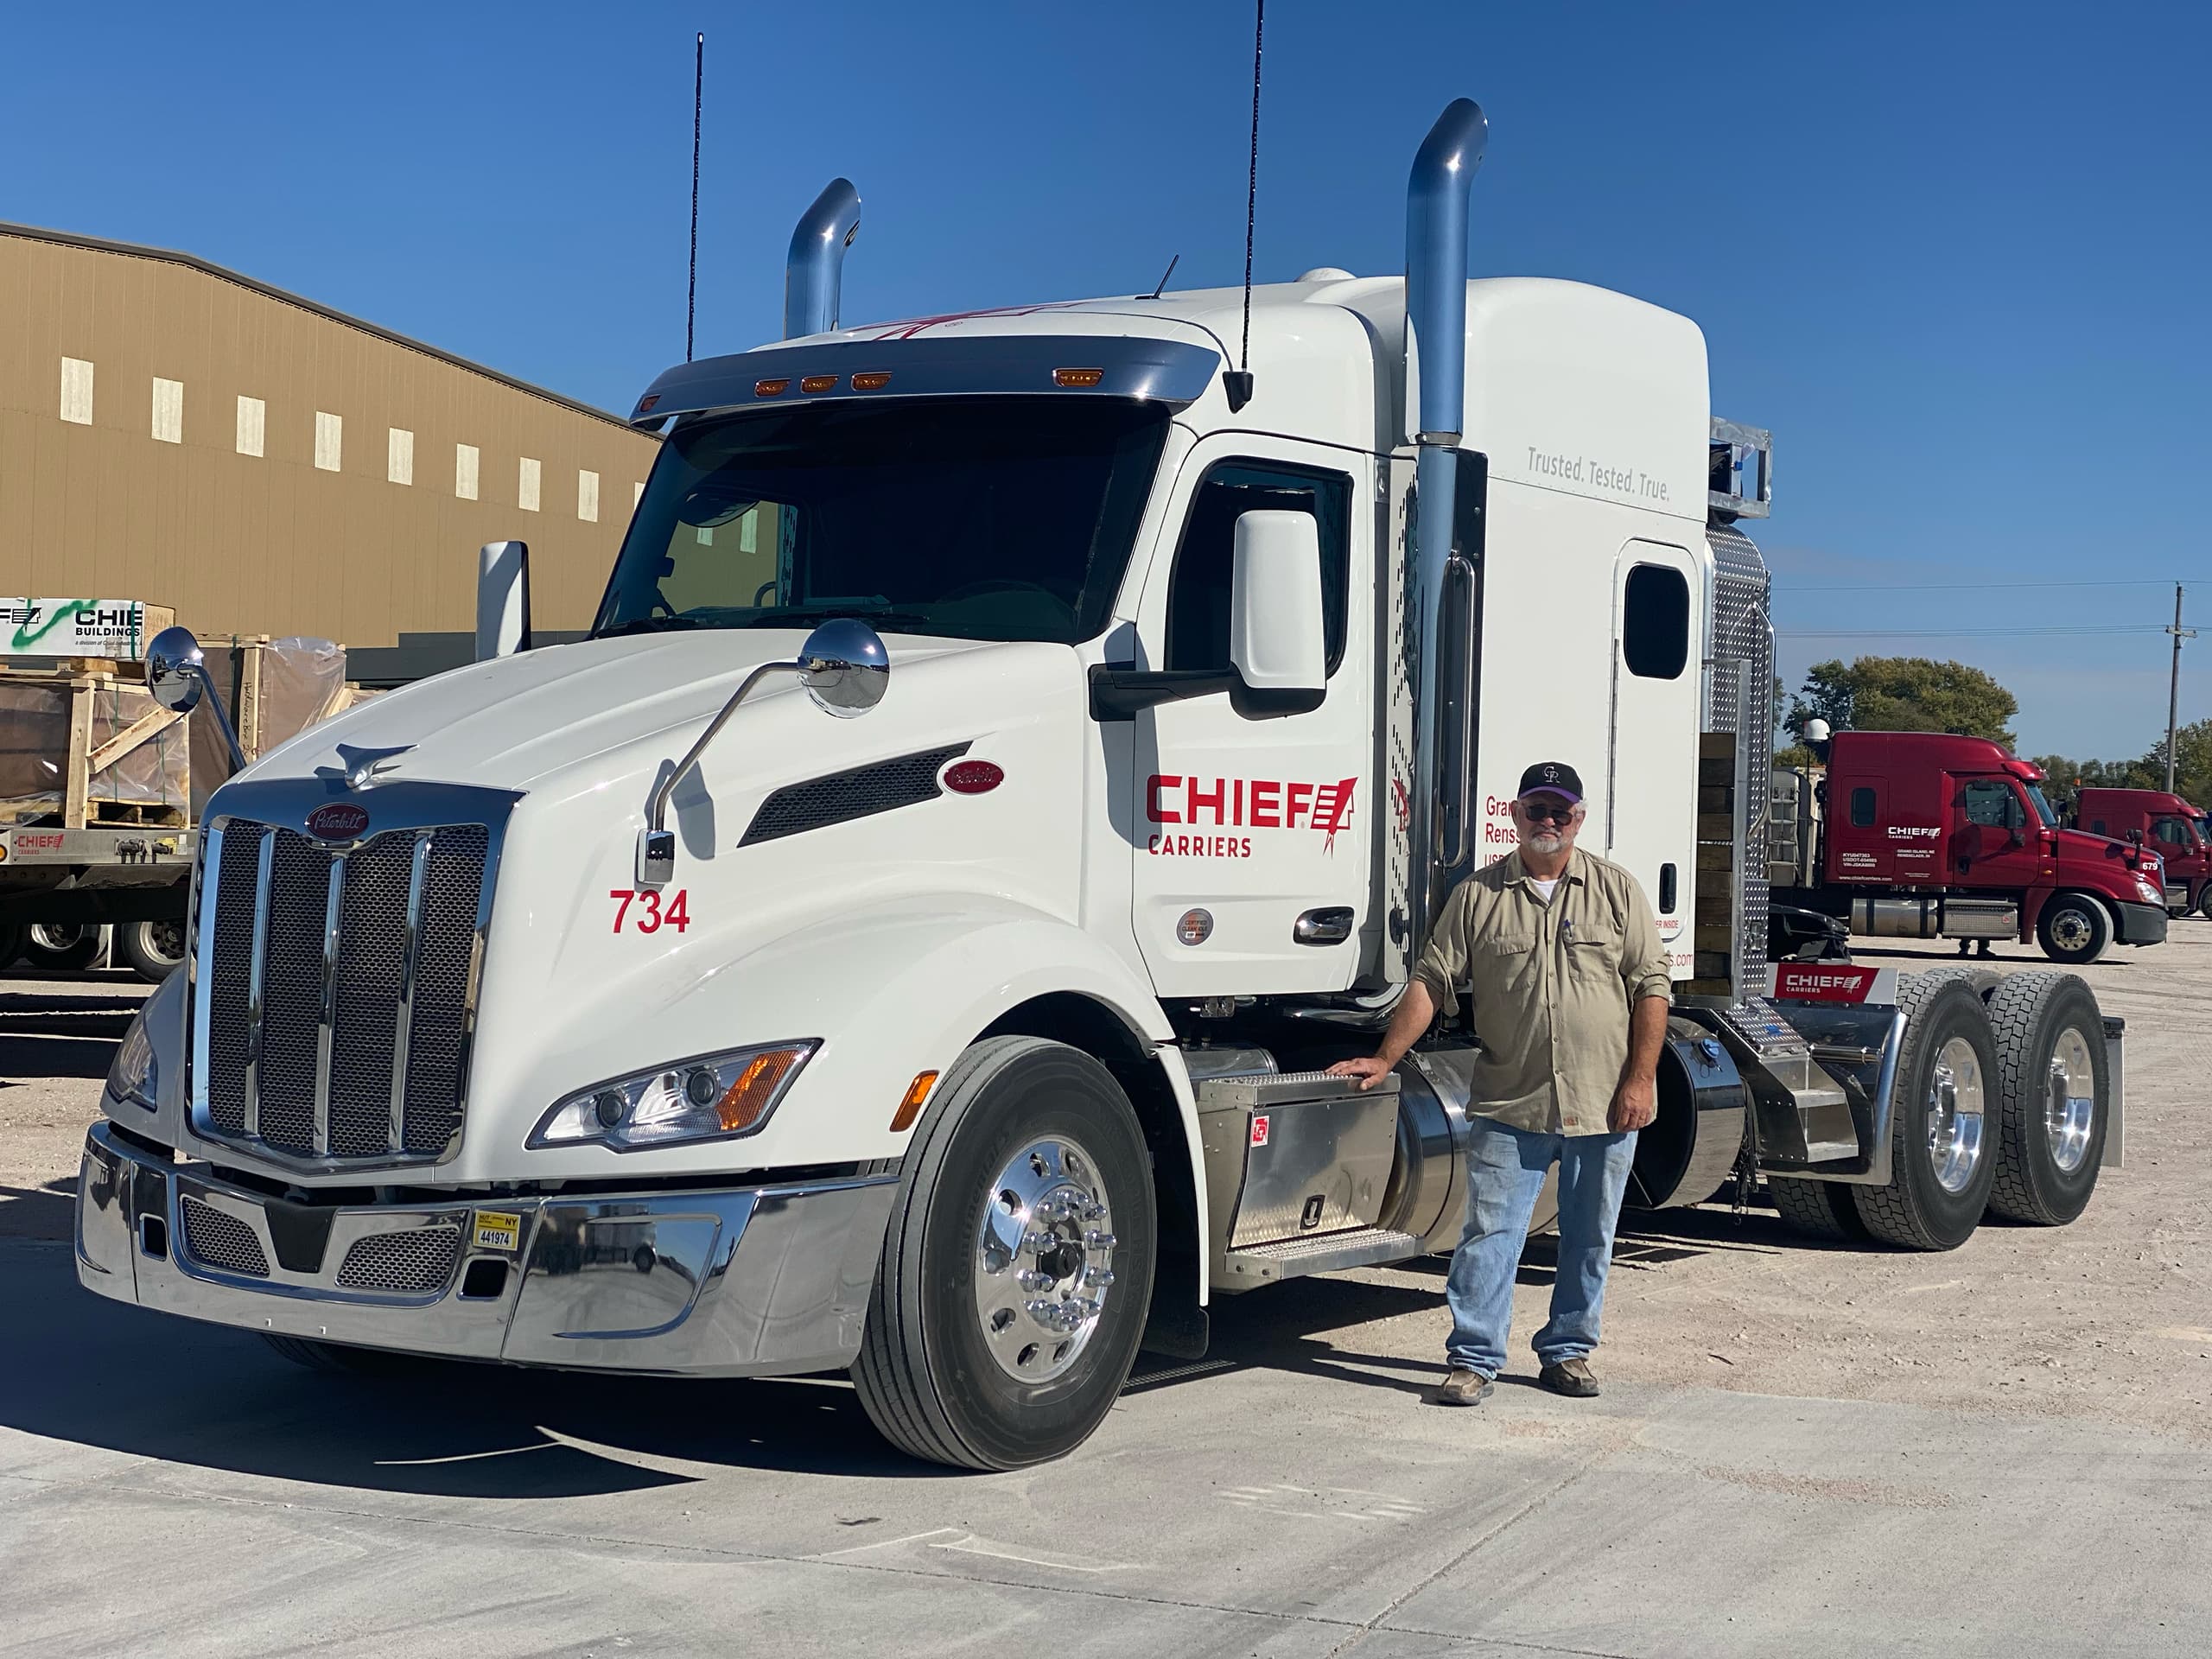 nebraska truck driver for chief carriers standing outside a white Chief Carriers semi